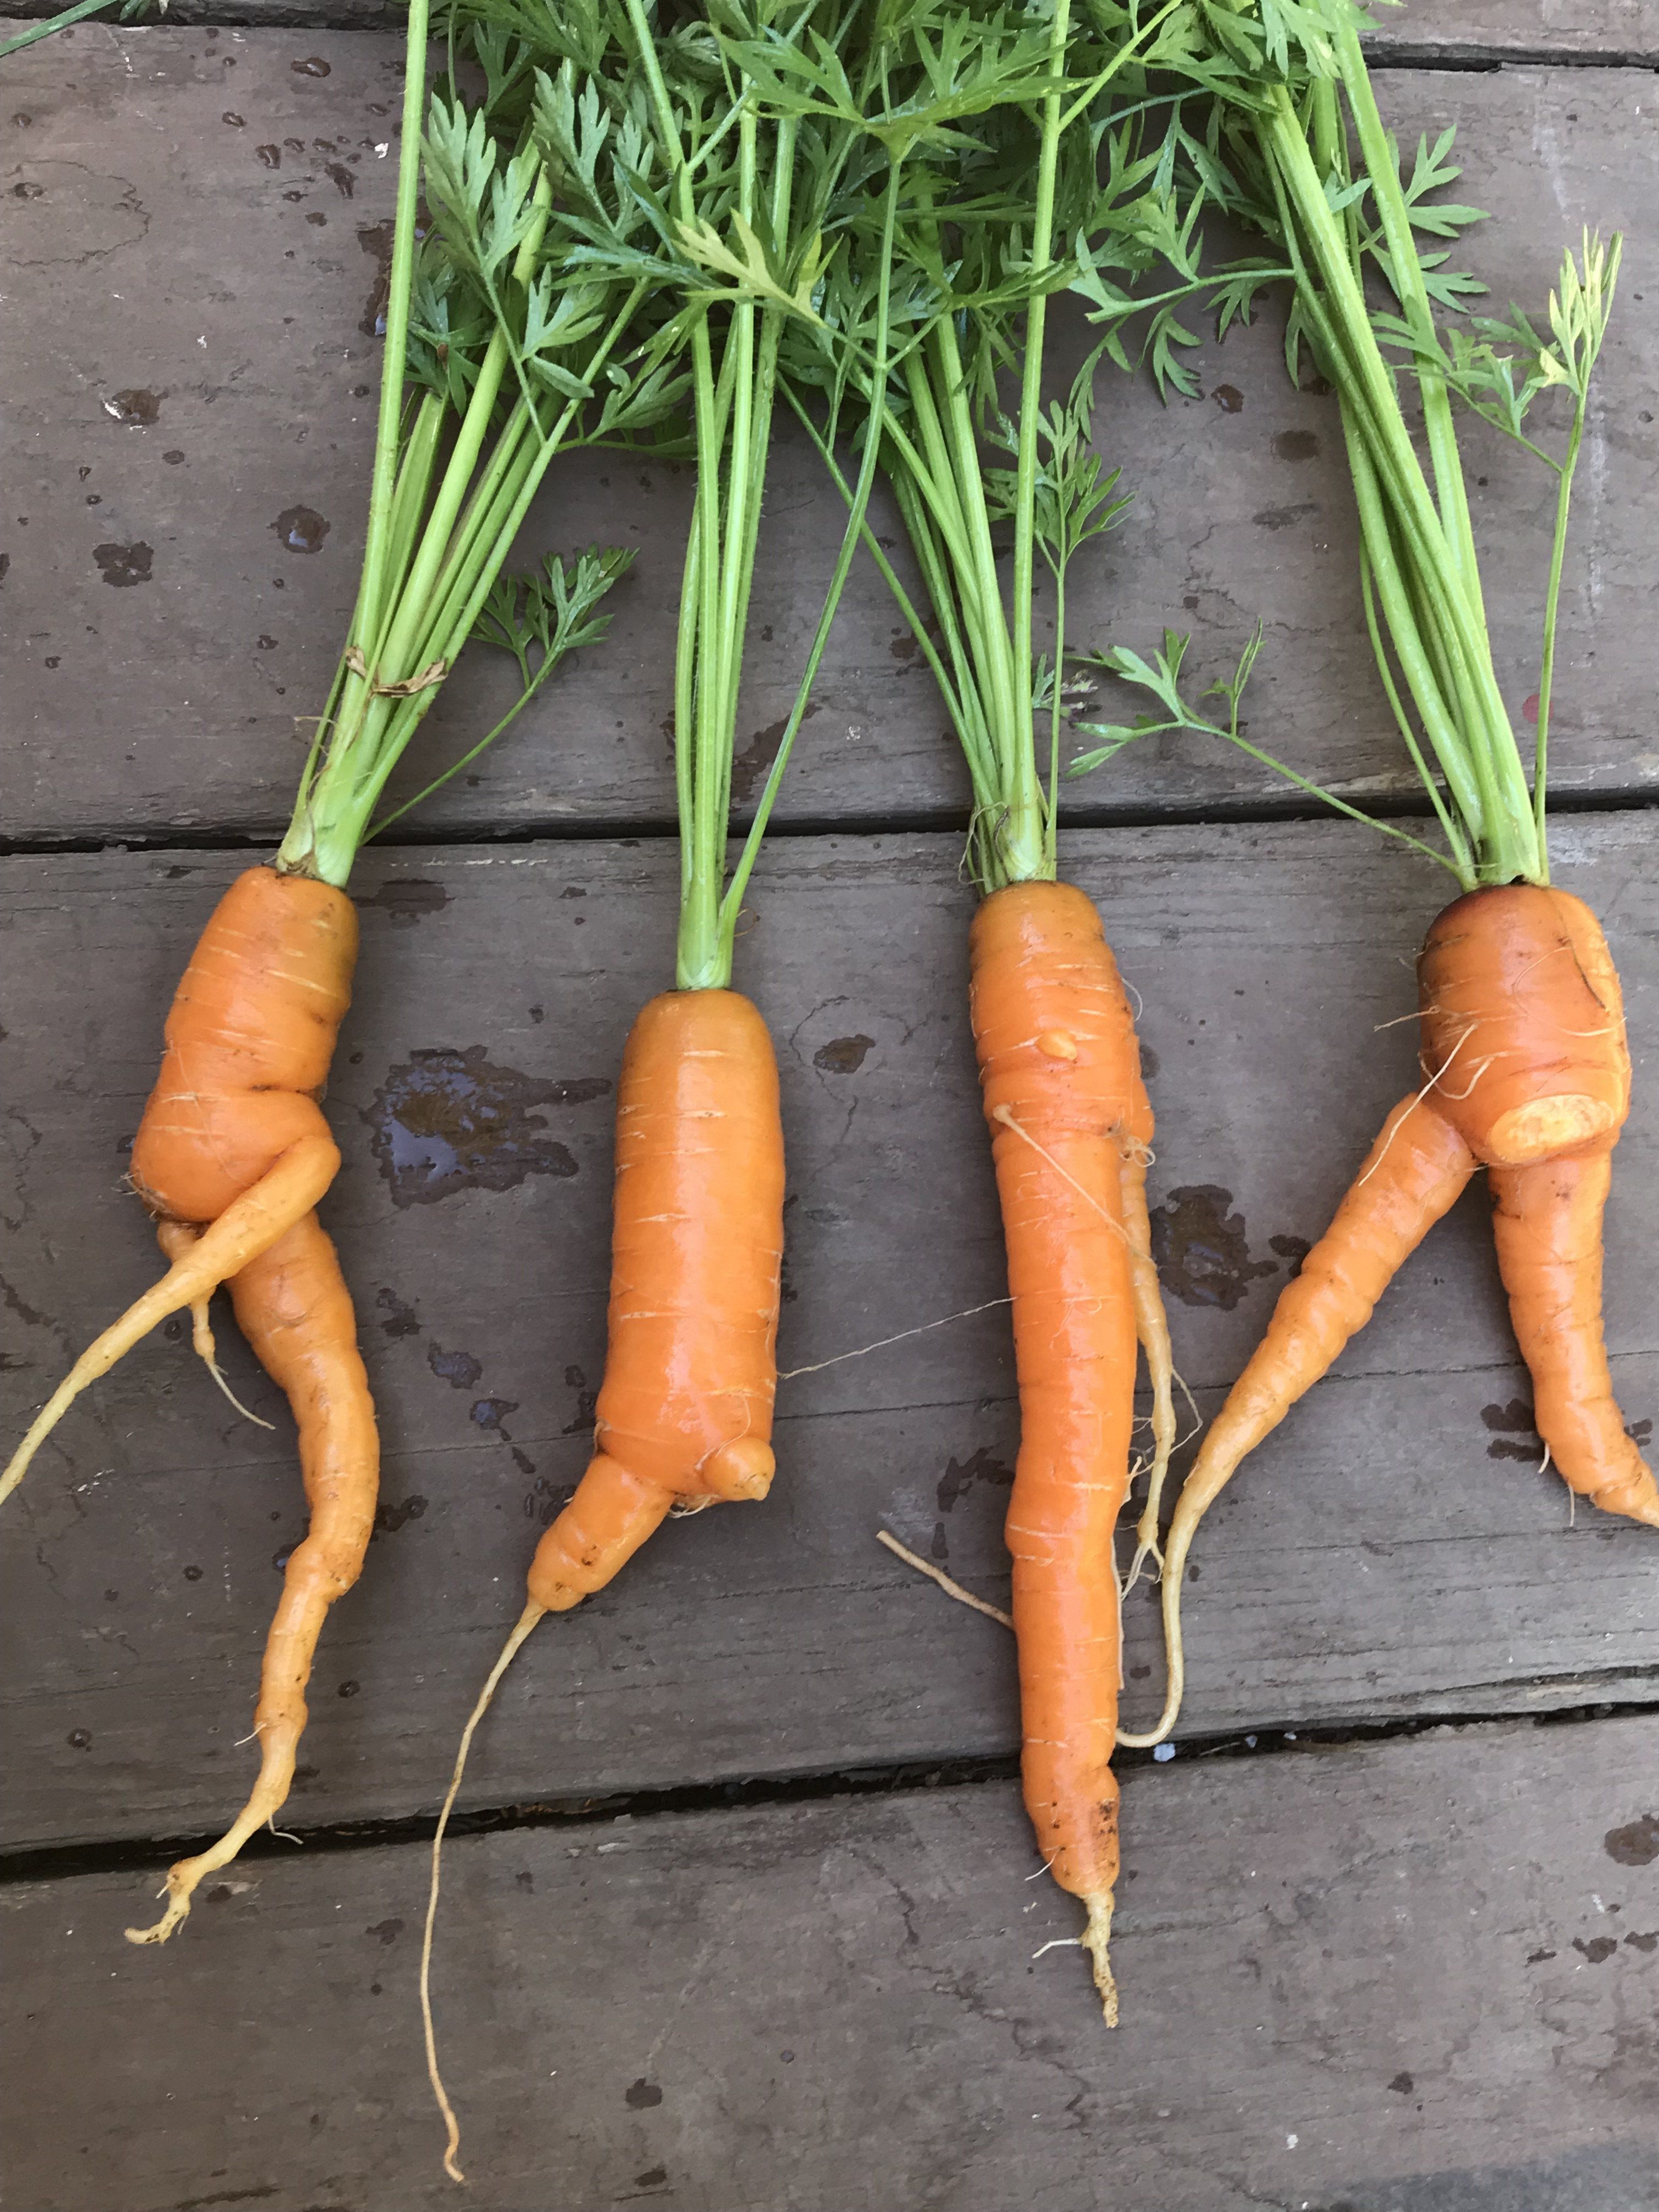 Farm Happenings for the Week of August 2, 2020